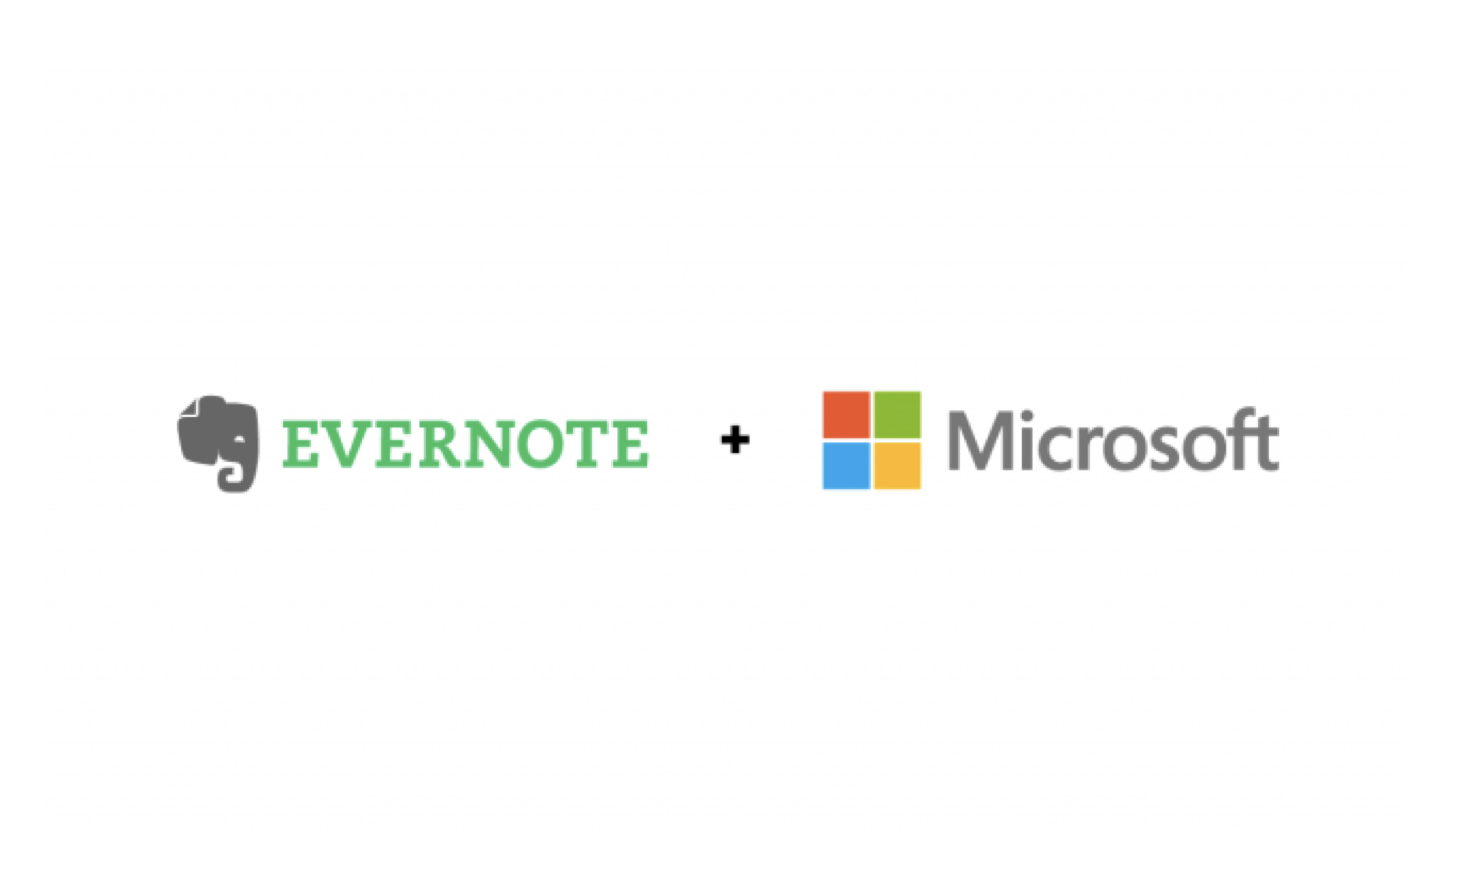 Evernote integration now available in Microsoft Teams - OnMSFT.com - June 19, 2018